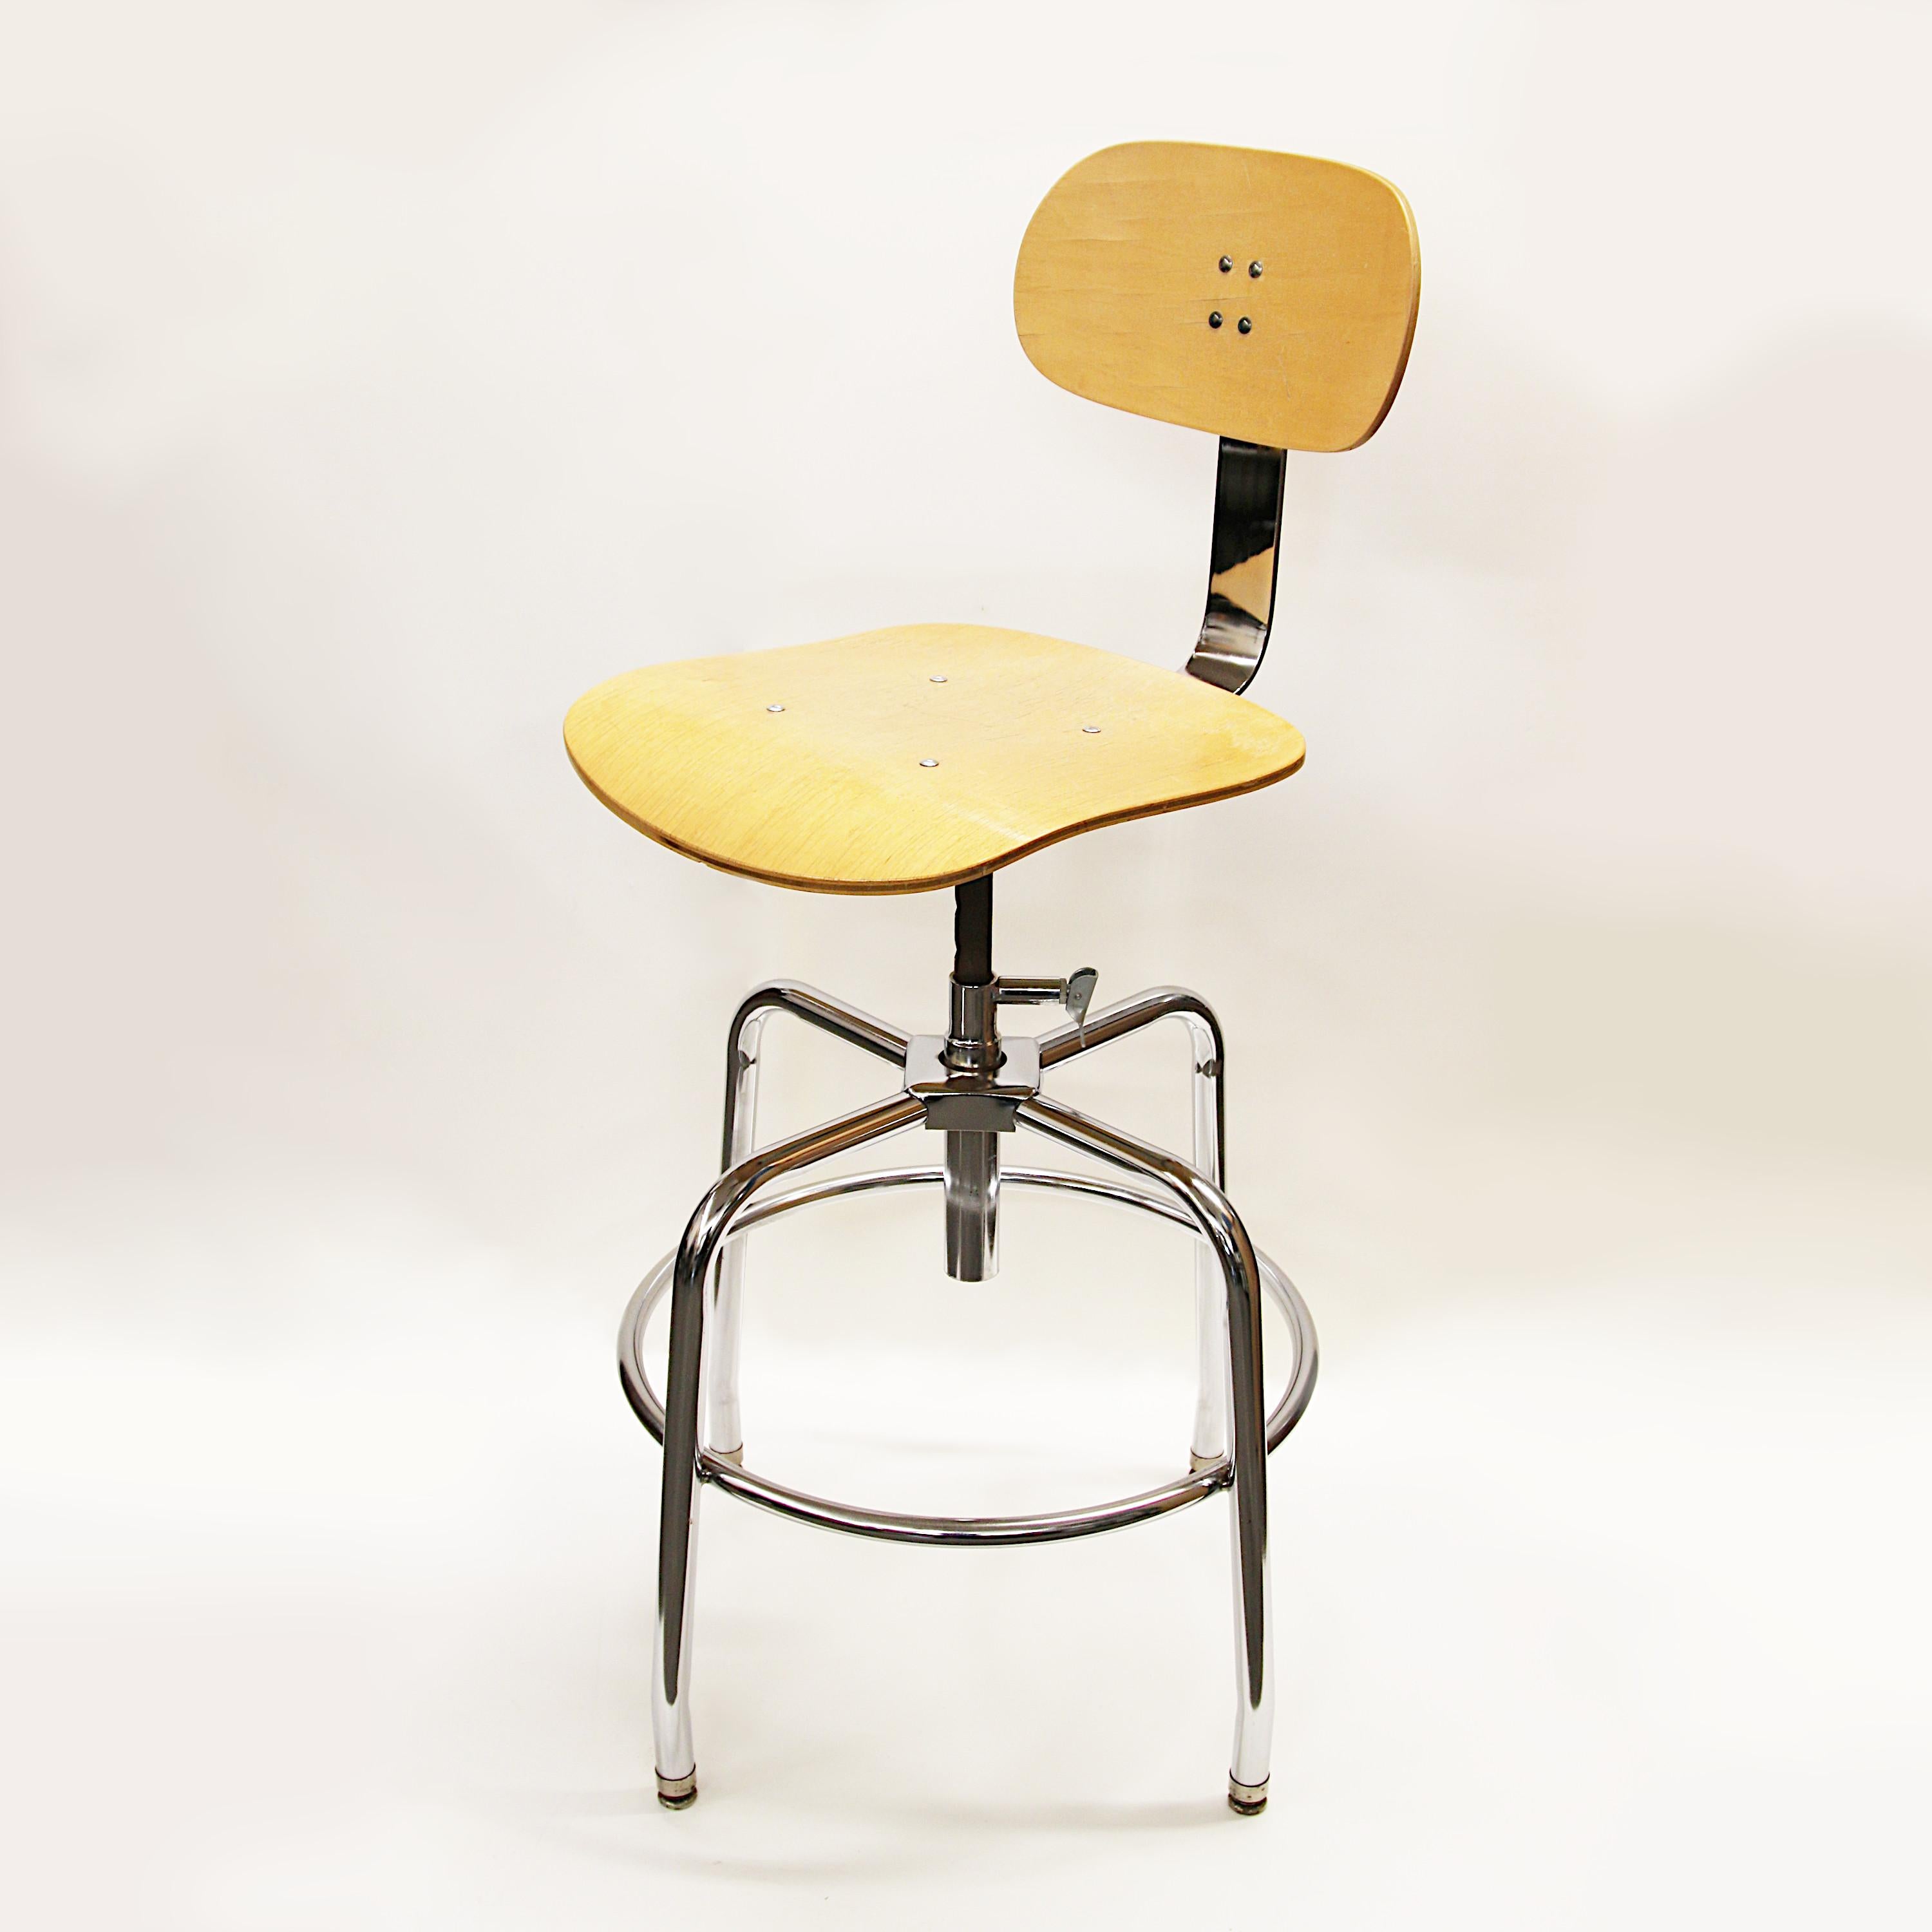 Mid-century drafting stools by Garrett Tubular products. Stools feature height-adjustable bent-plywood backrest & seat, chrome tubular frame w/ footrest and a great industrial look! Seat height can be adjusted to 24, 26, or 28 inches high. Over 18